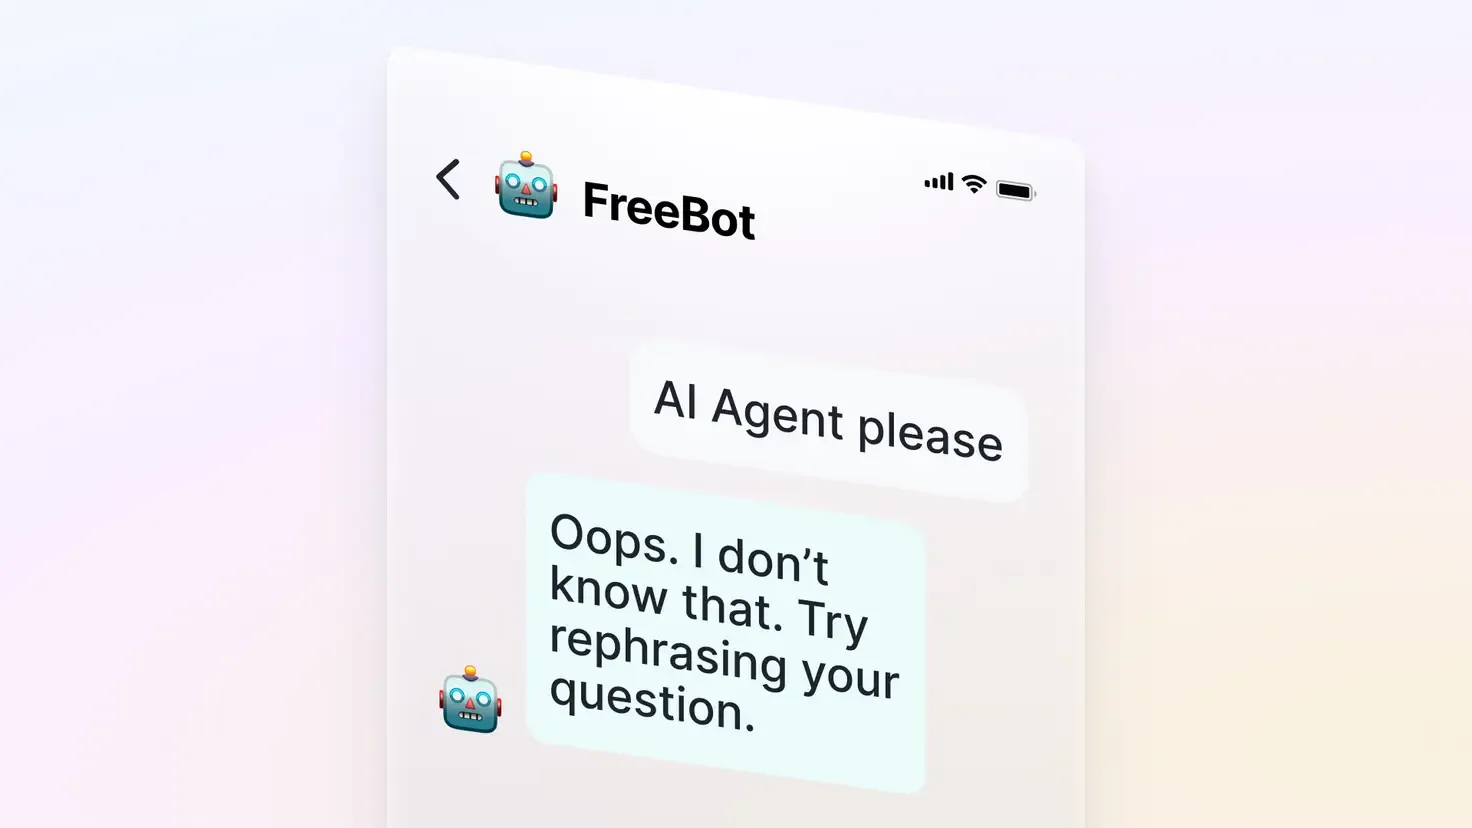 FreeBot doesn't understand